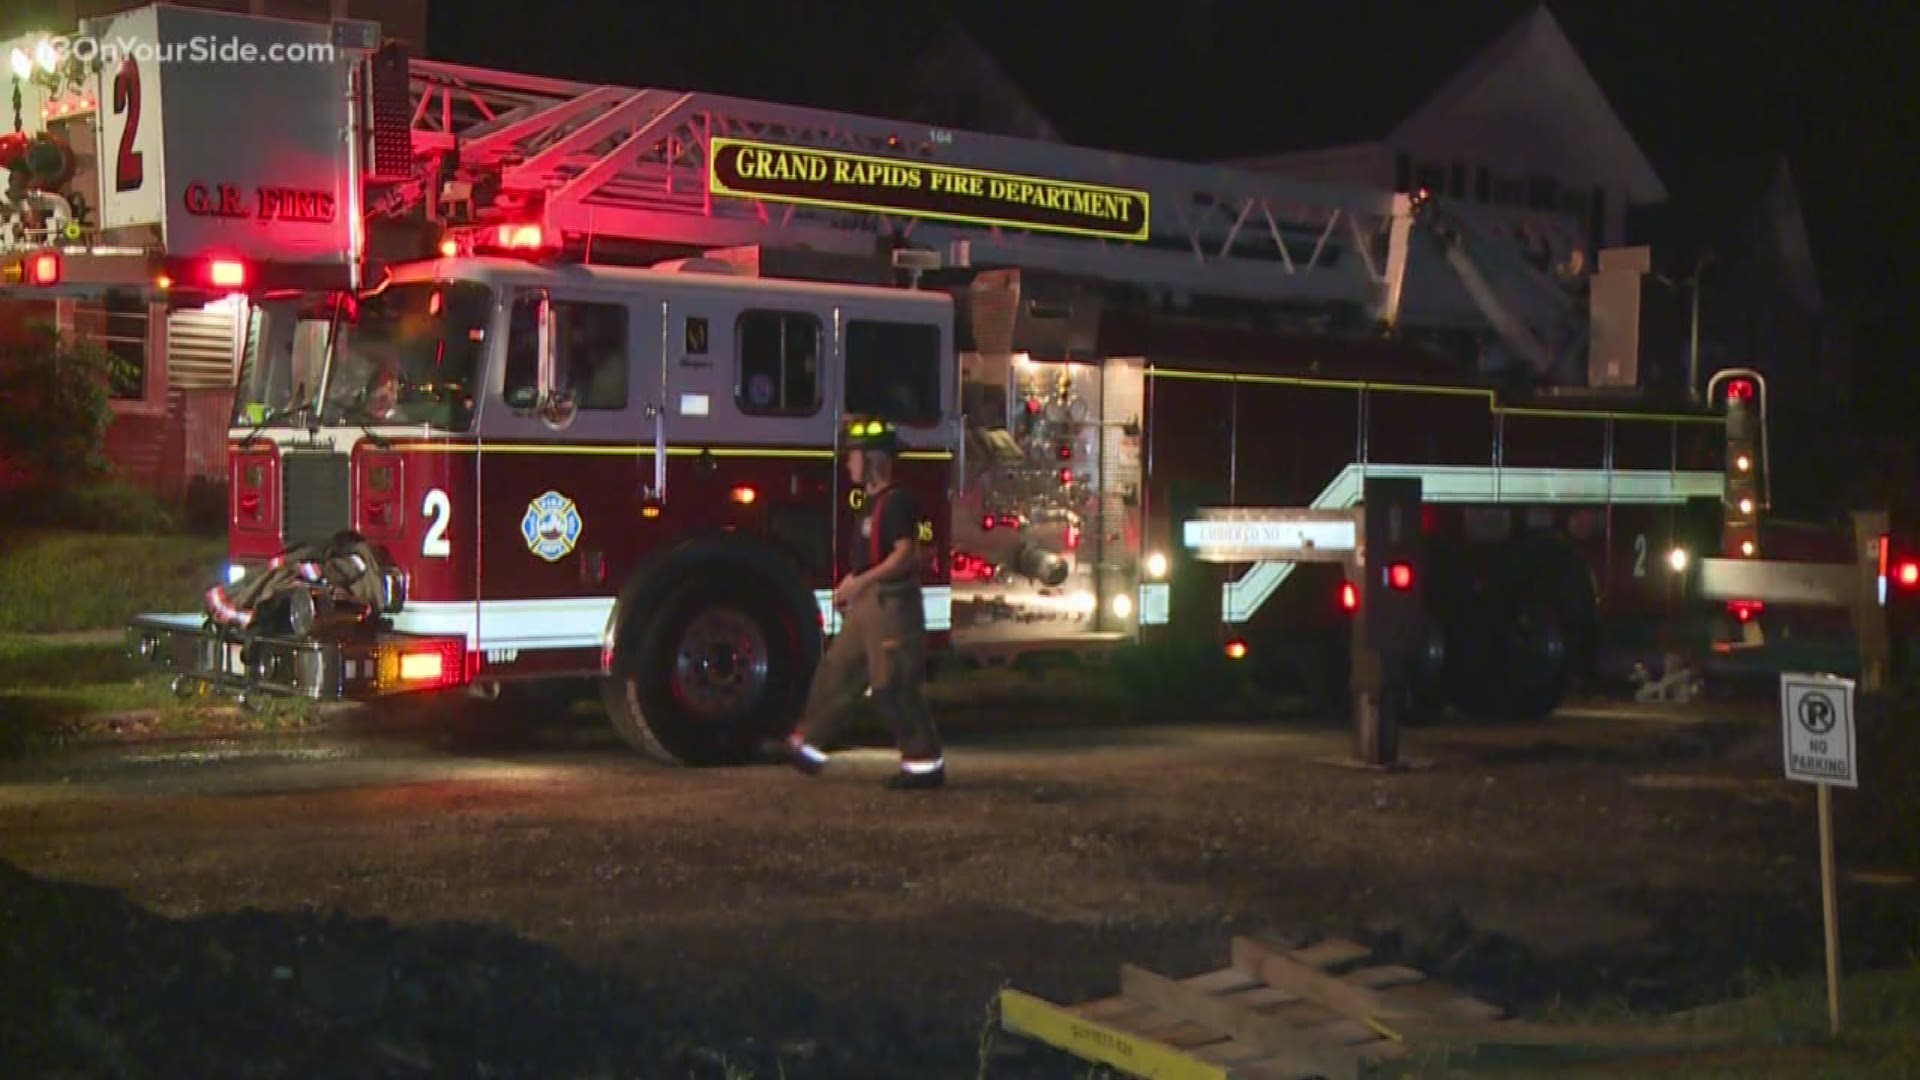 One man was killed in a fire overnight and crews spent multiple hours fighting a house fire that left "dramatic" damage. The department worked tirelessly to put out the fires, which were on the north and west sides of the city.